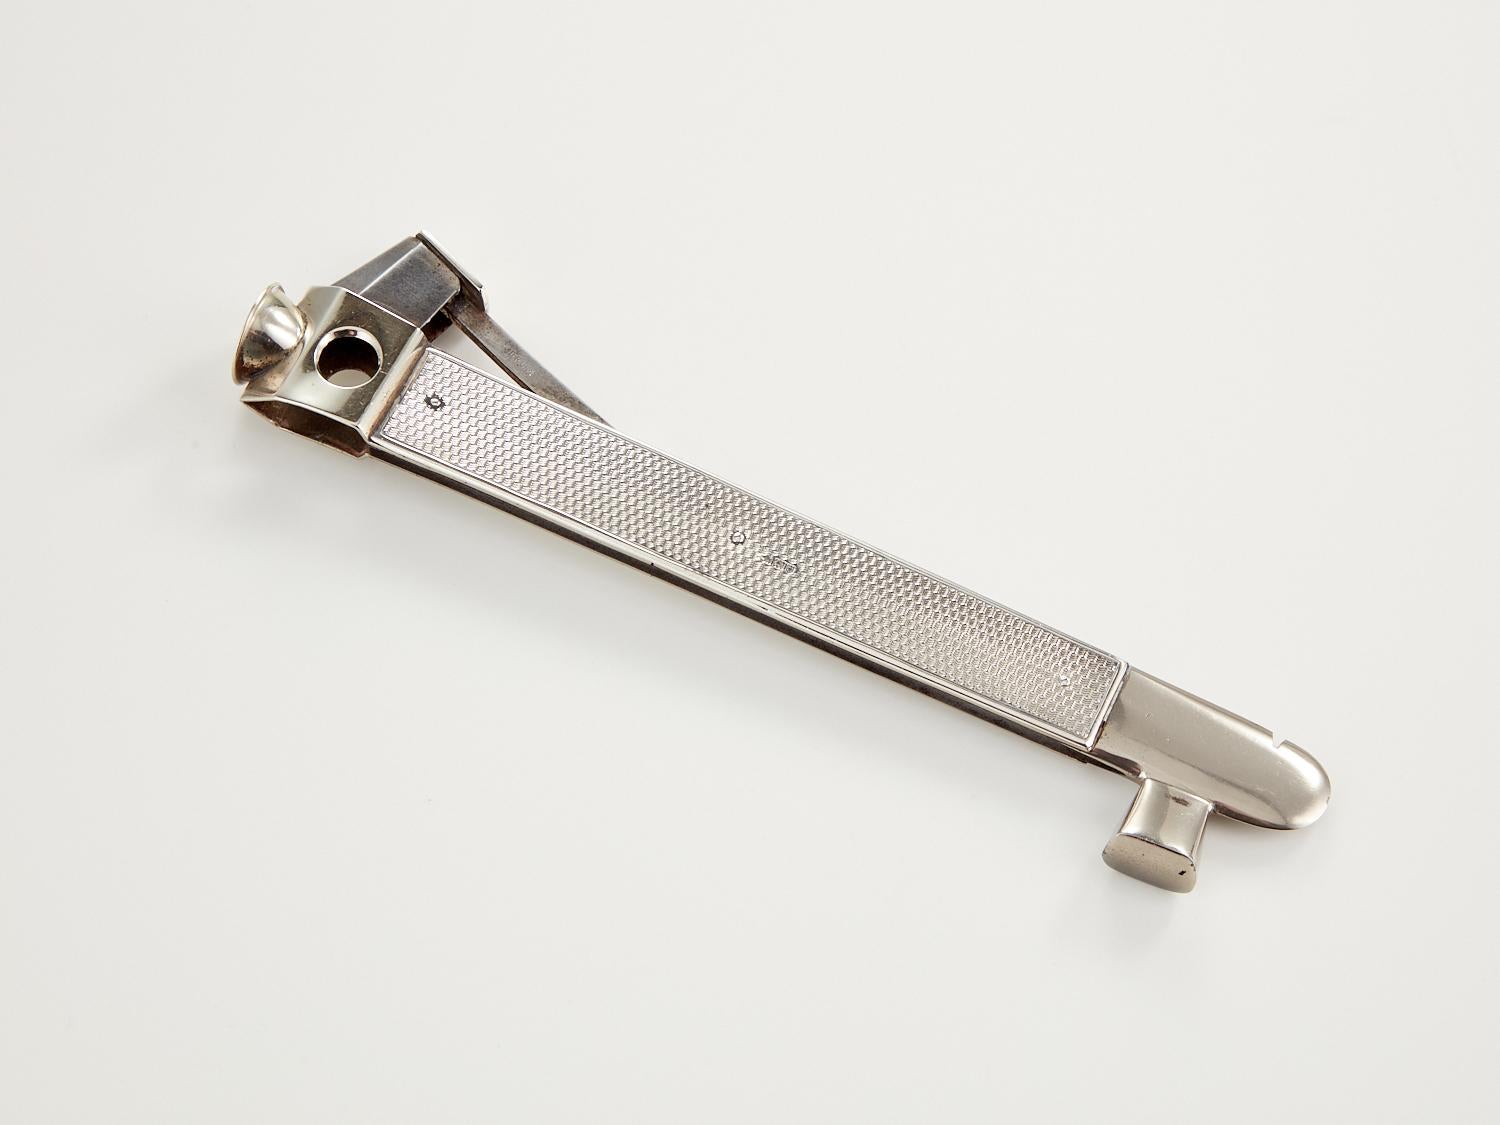 An Early 20th Century Cigar Cutter with silver mounts, Date London 1913.

This cigar cutter is unusual being 8 1/2” long. It's base metal body is mounted with English silver which dates to London 1913.
This piece is showing signs of ware but still a